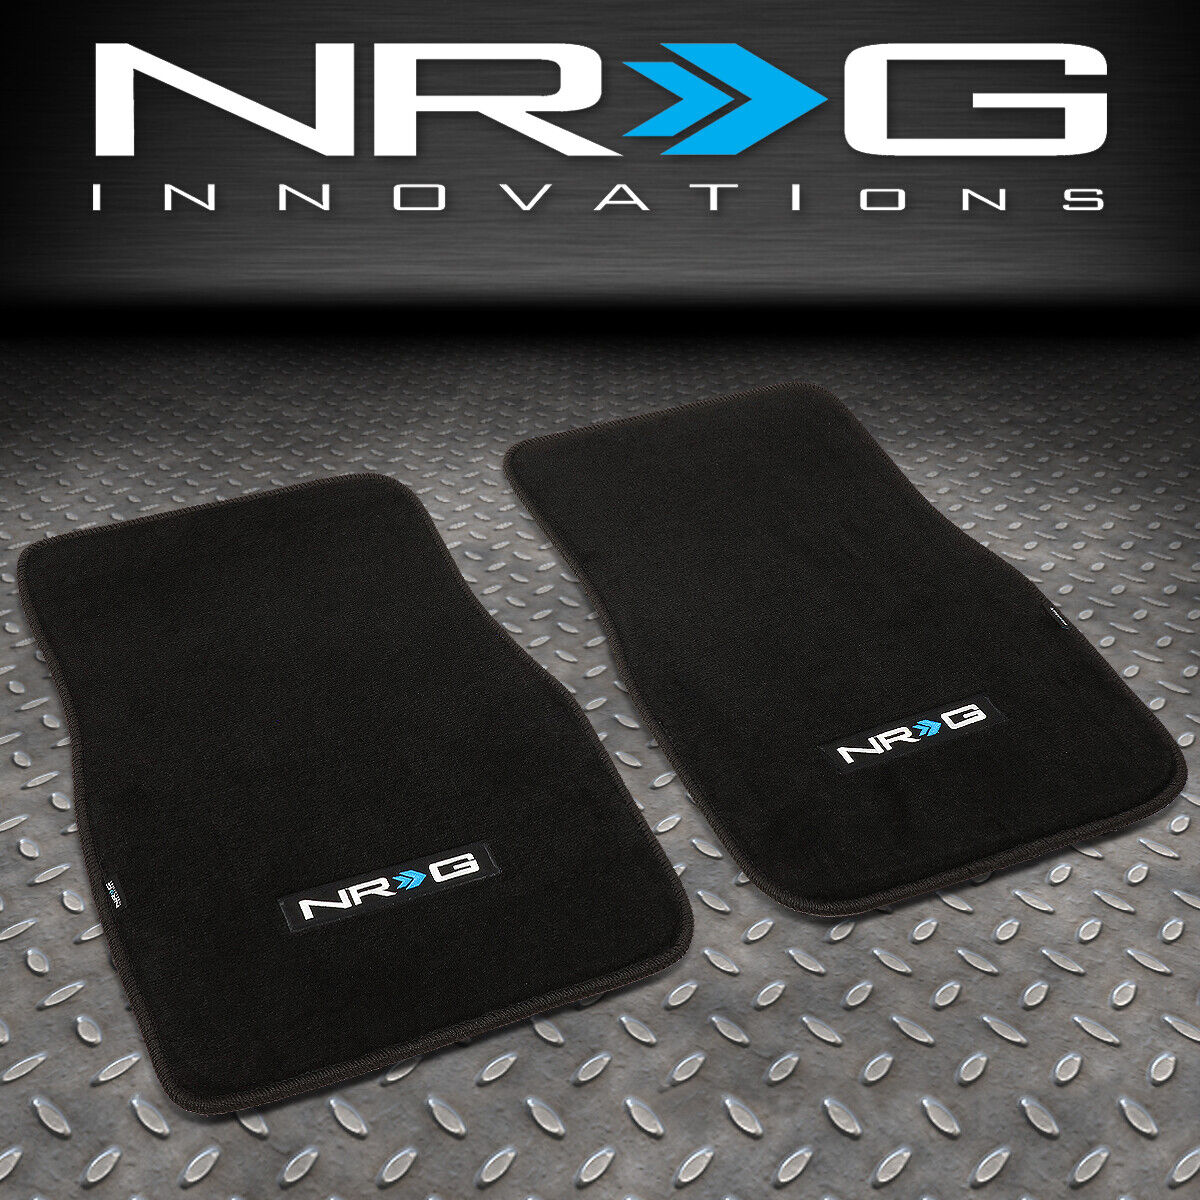 NRG INNOVATIONS FMR-800 PAIR UNIVERSAL AUTO FRONT FLOOR MATS LINER PADS CARPET